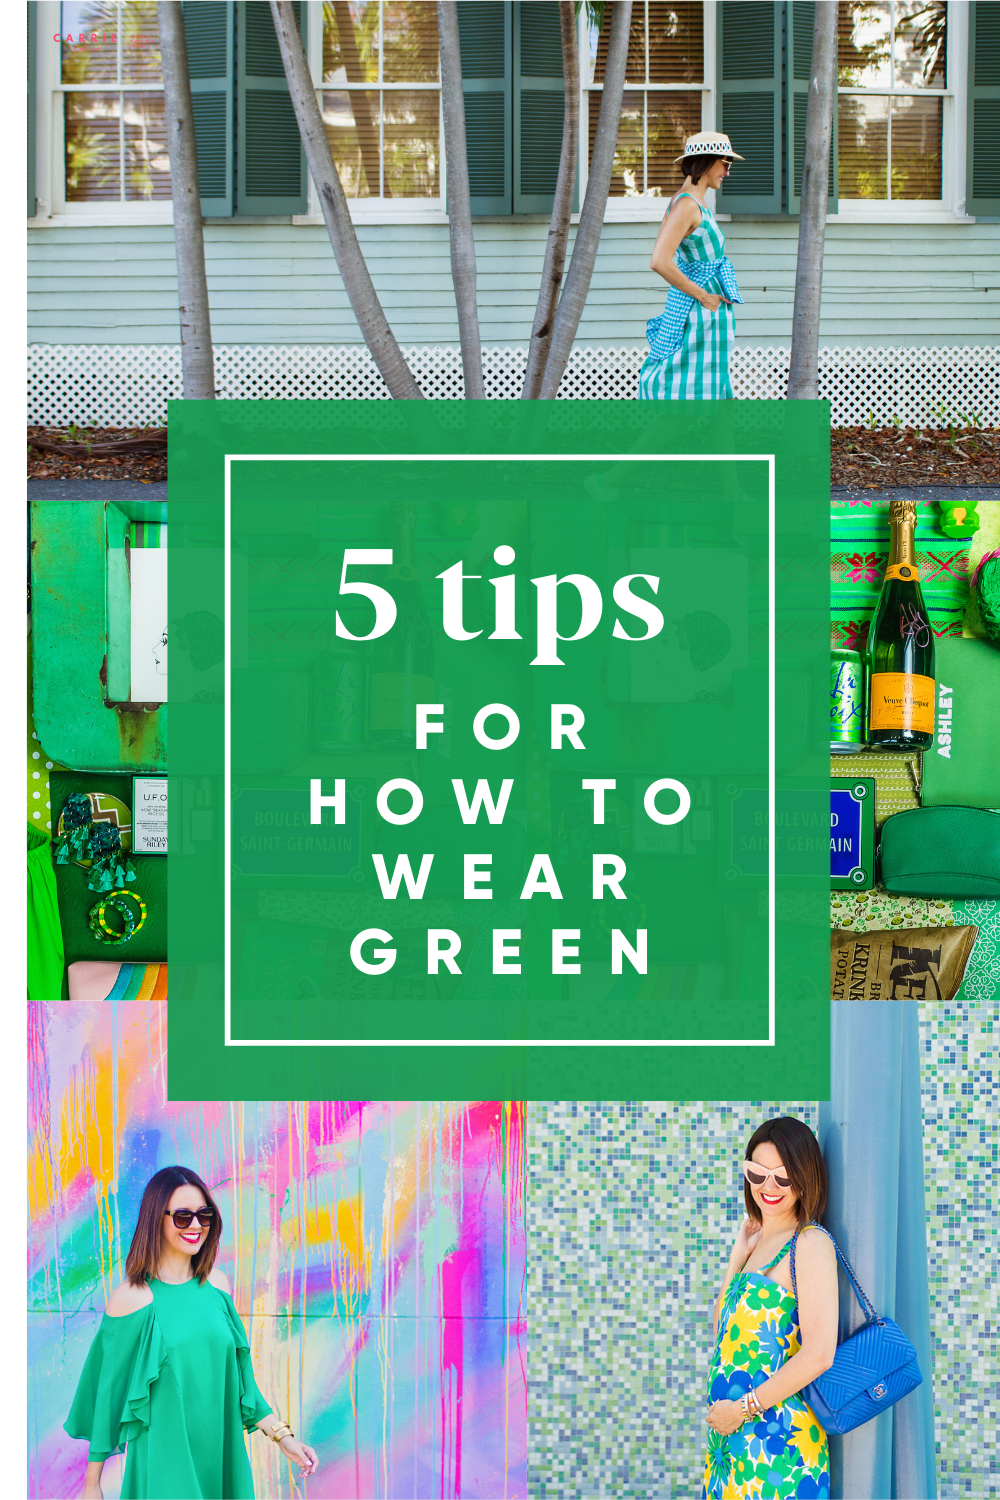 5 tips for wearing green